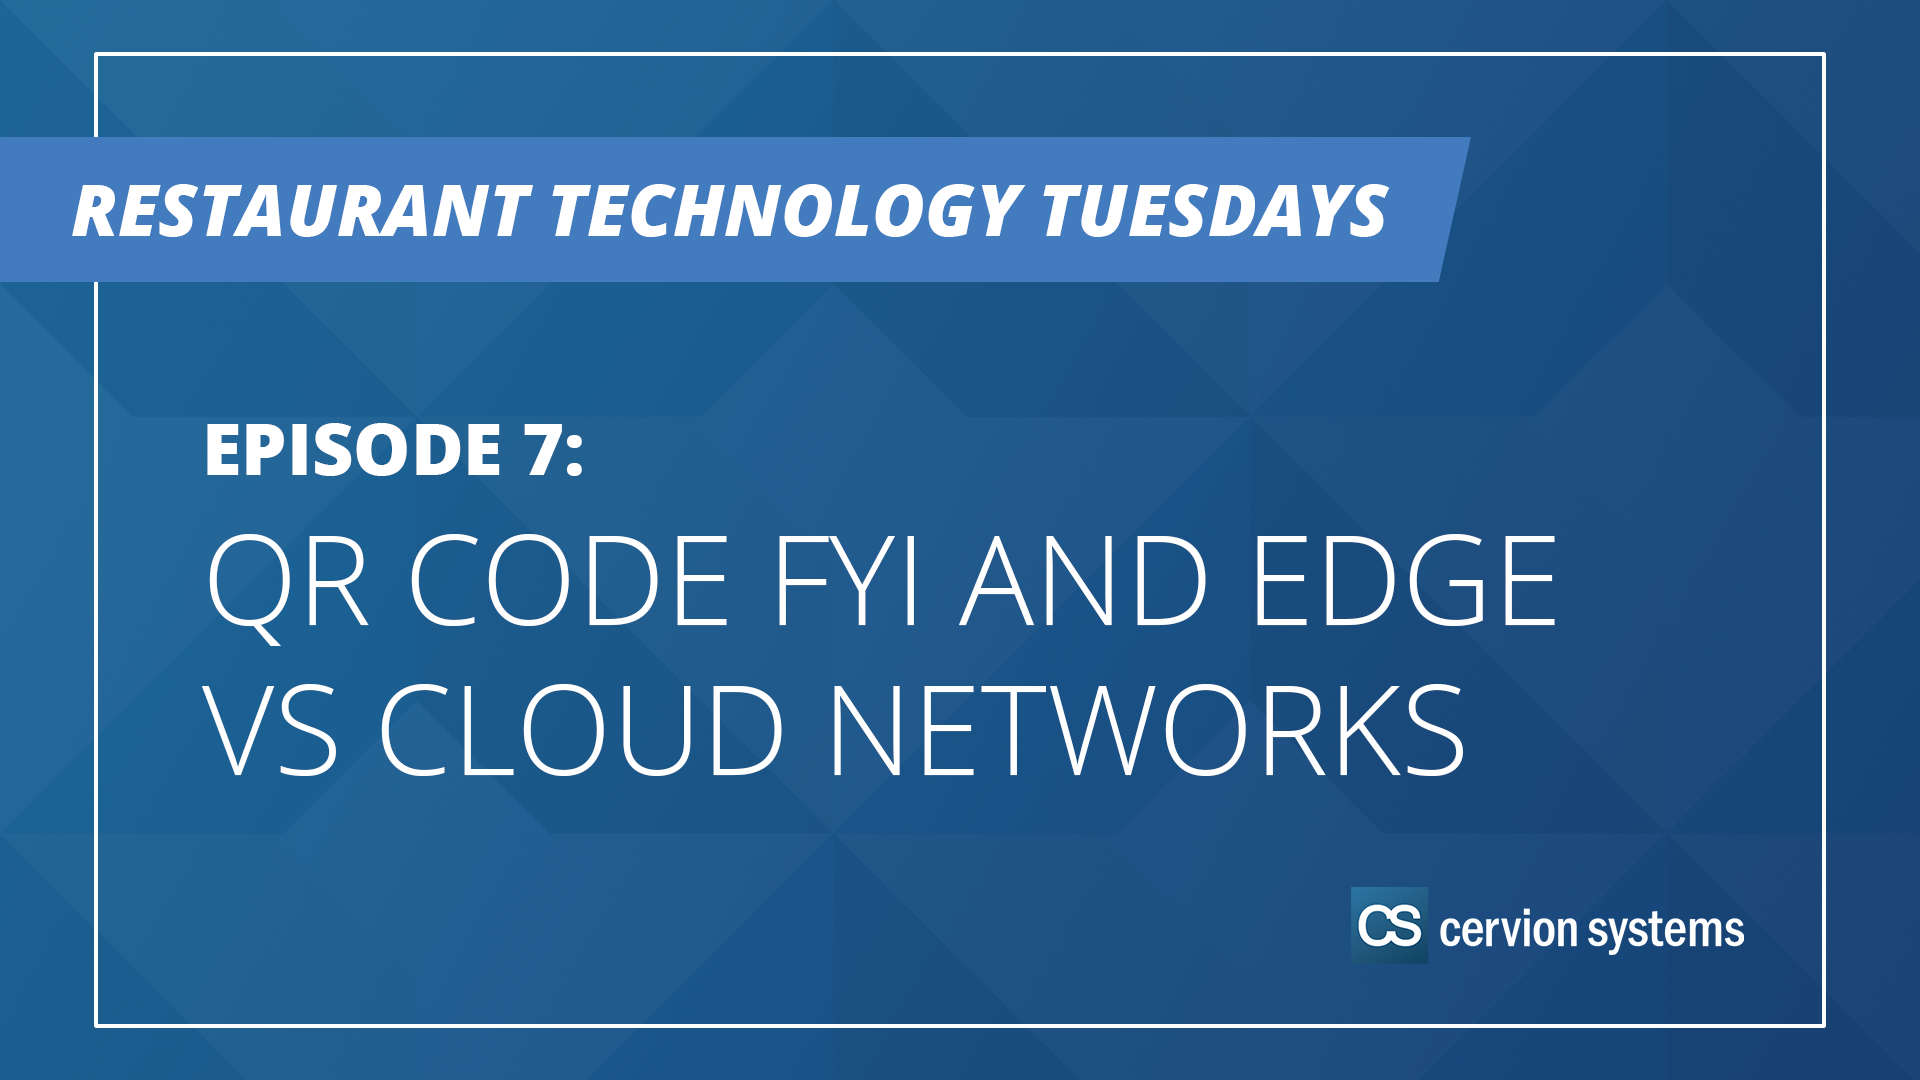 qr-code-fyi-and-edge-vs-cloud-based-networks